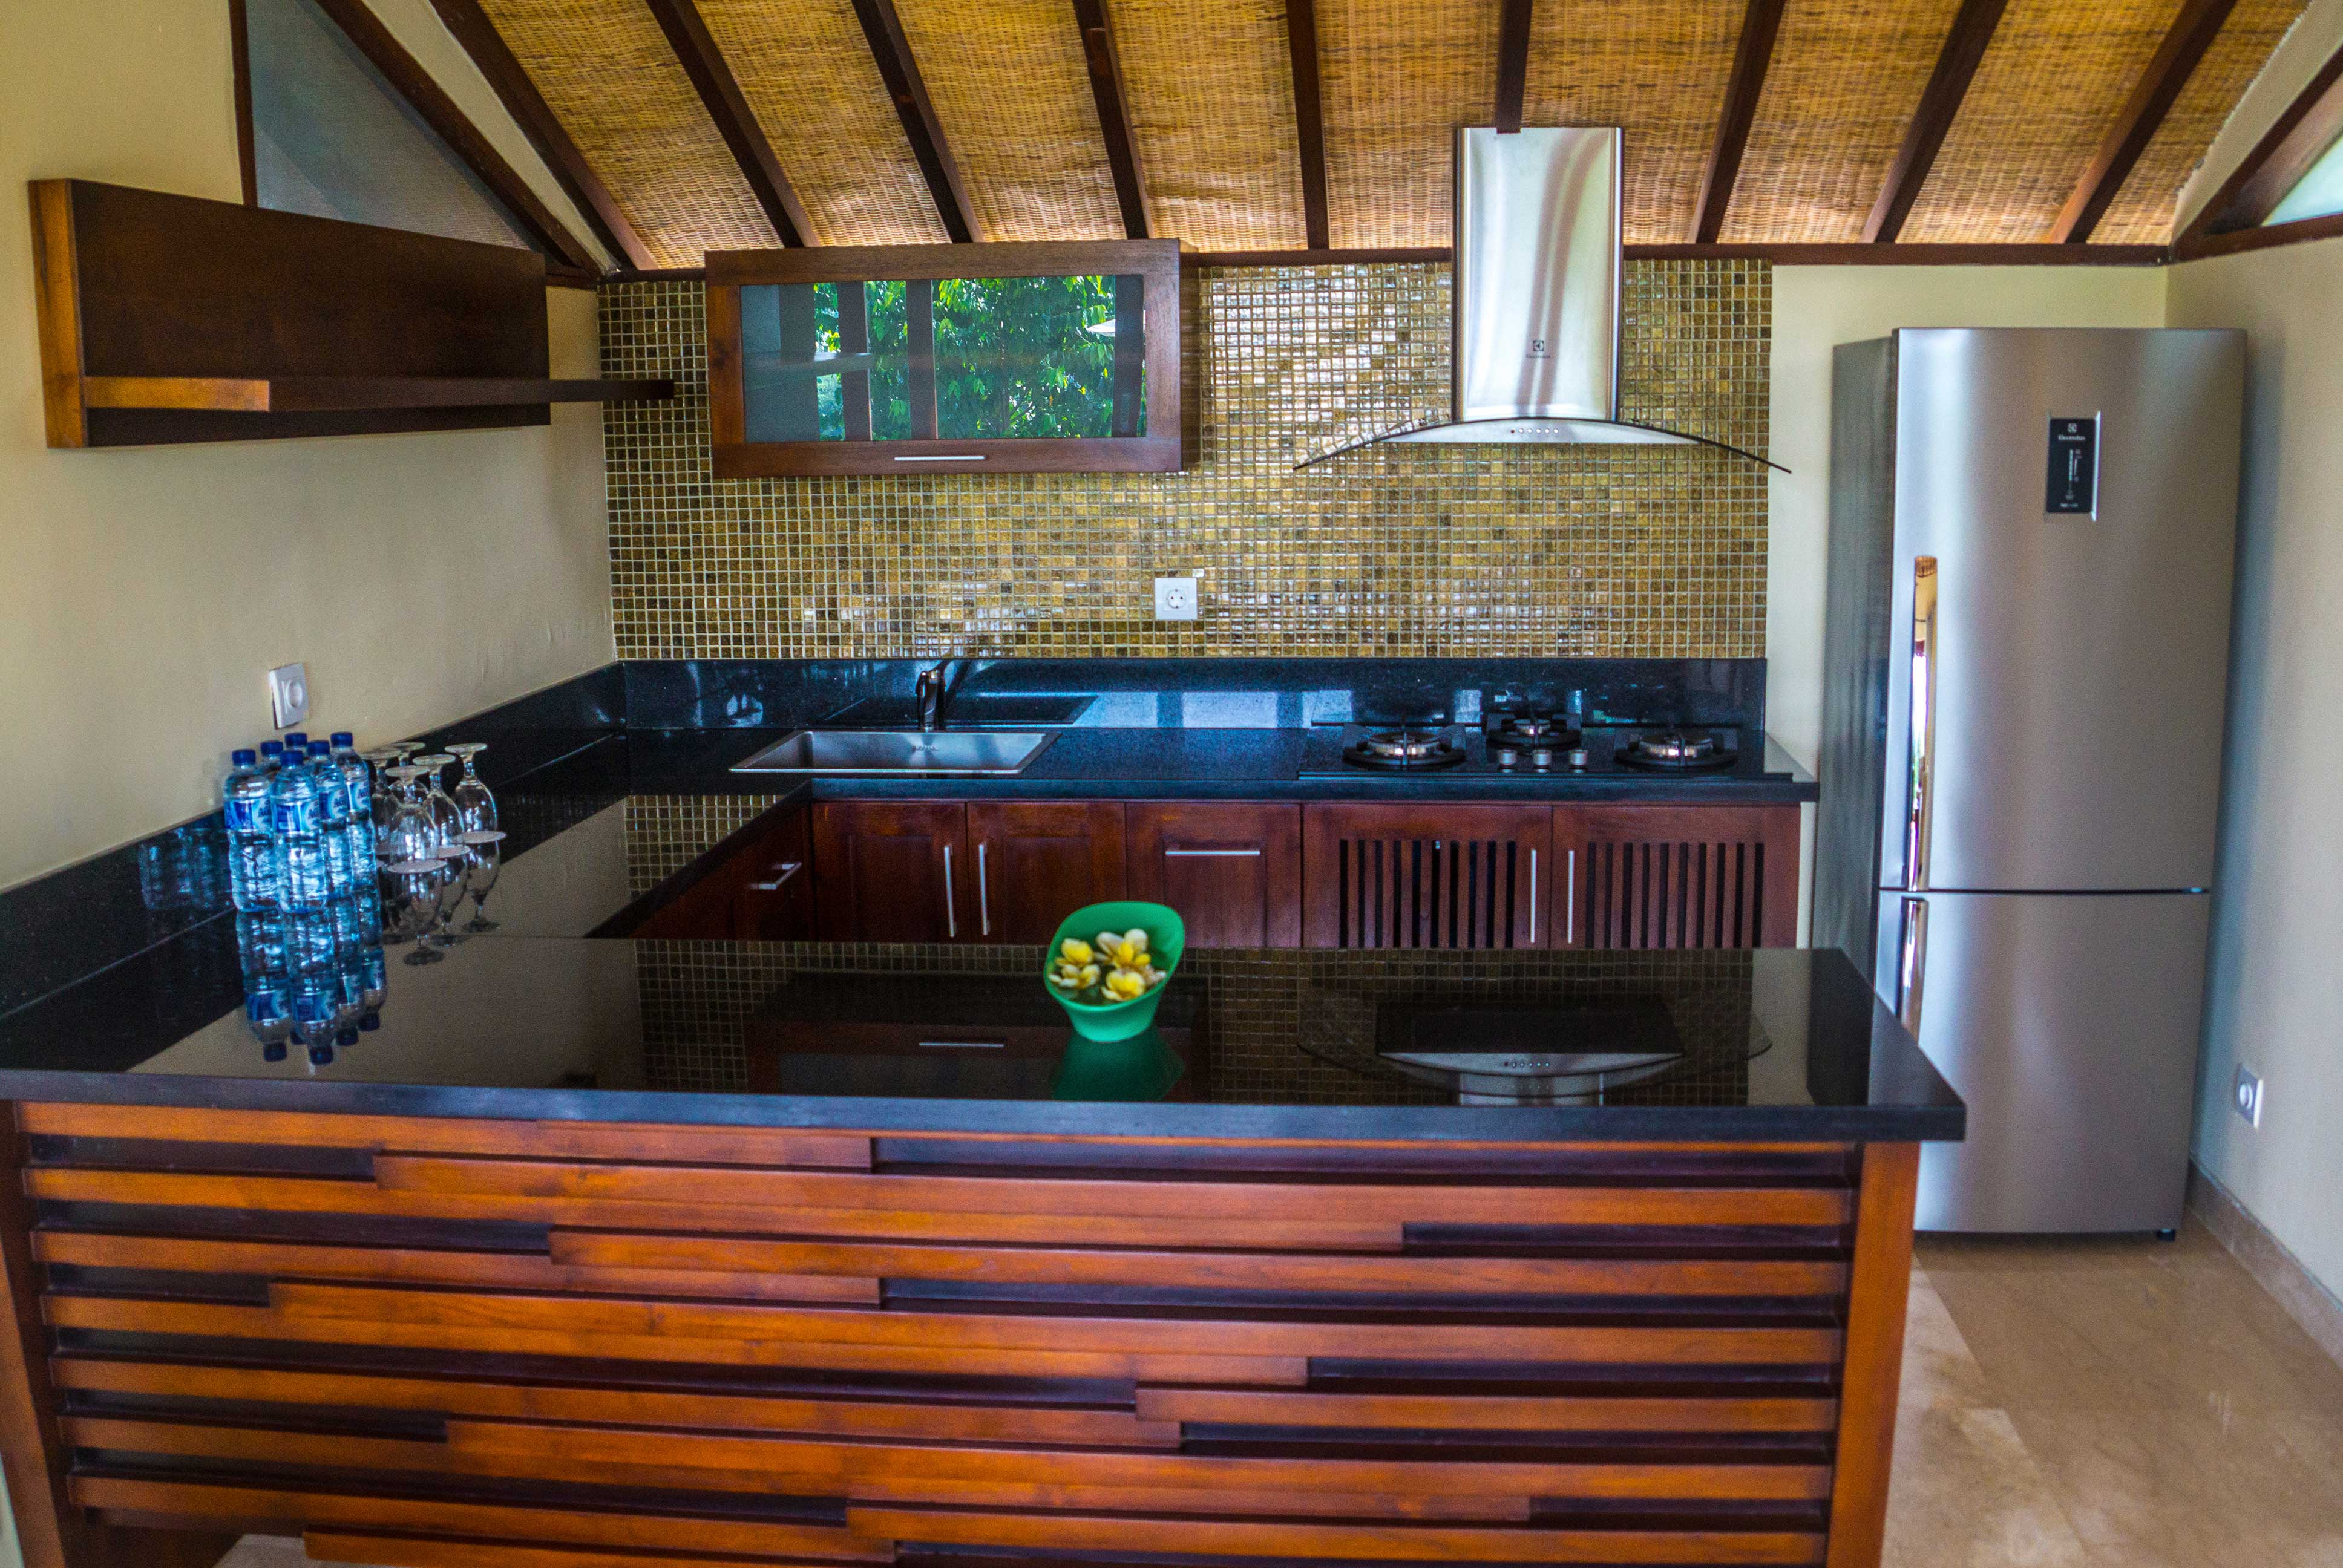 Two Bedroom Pool Villa's kitchen and appliances